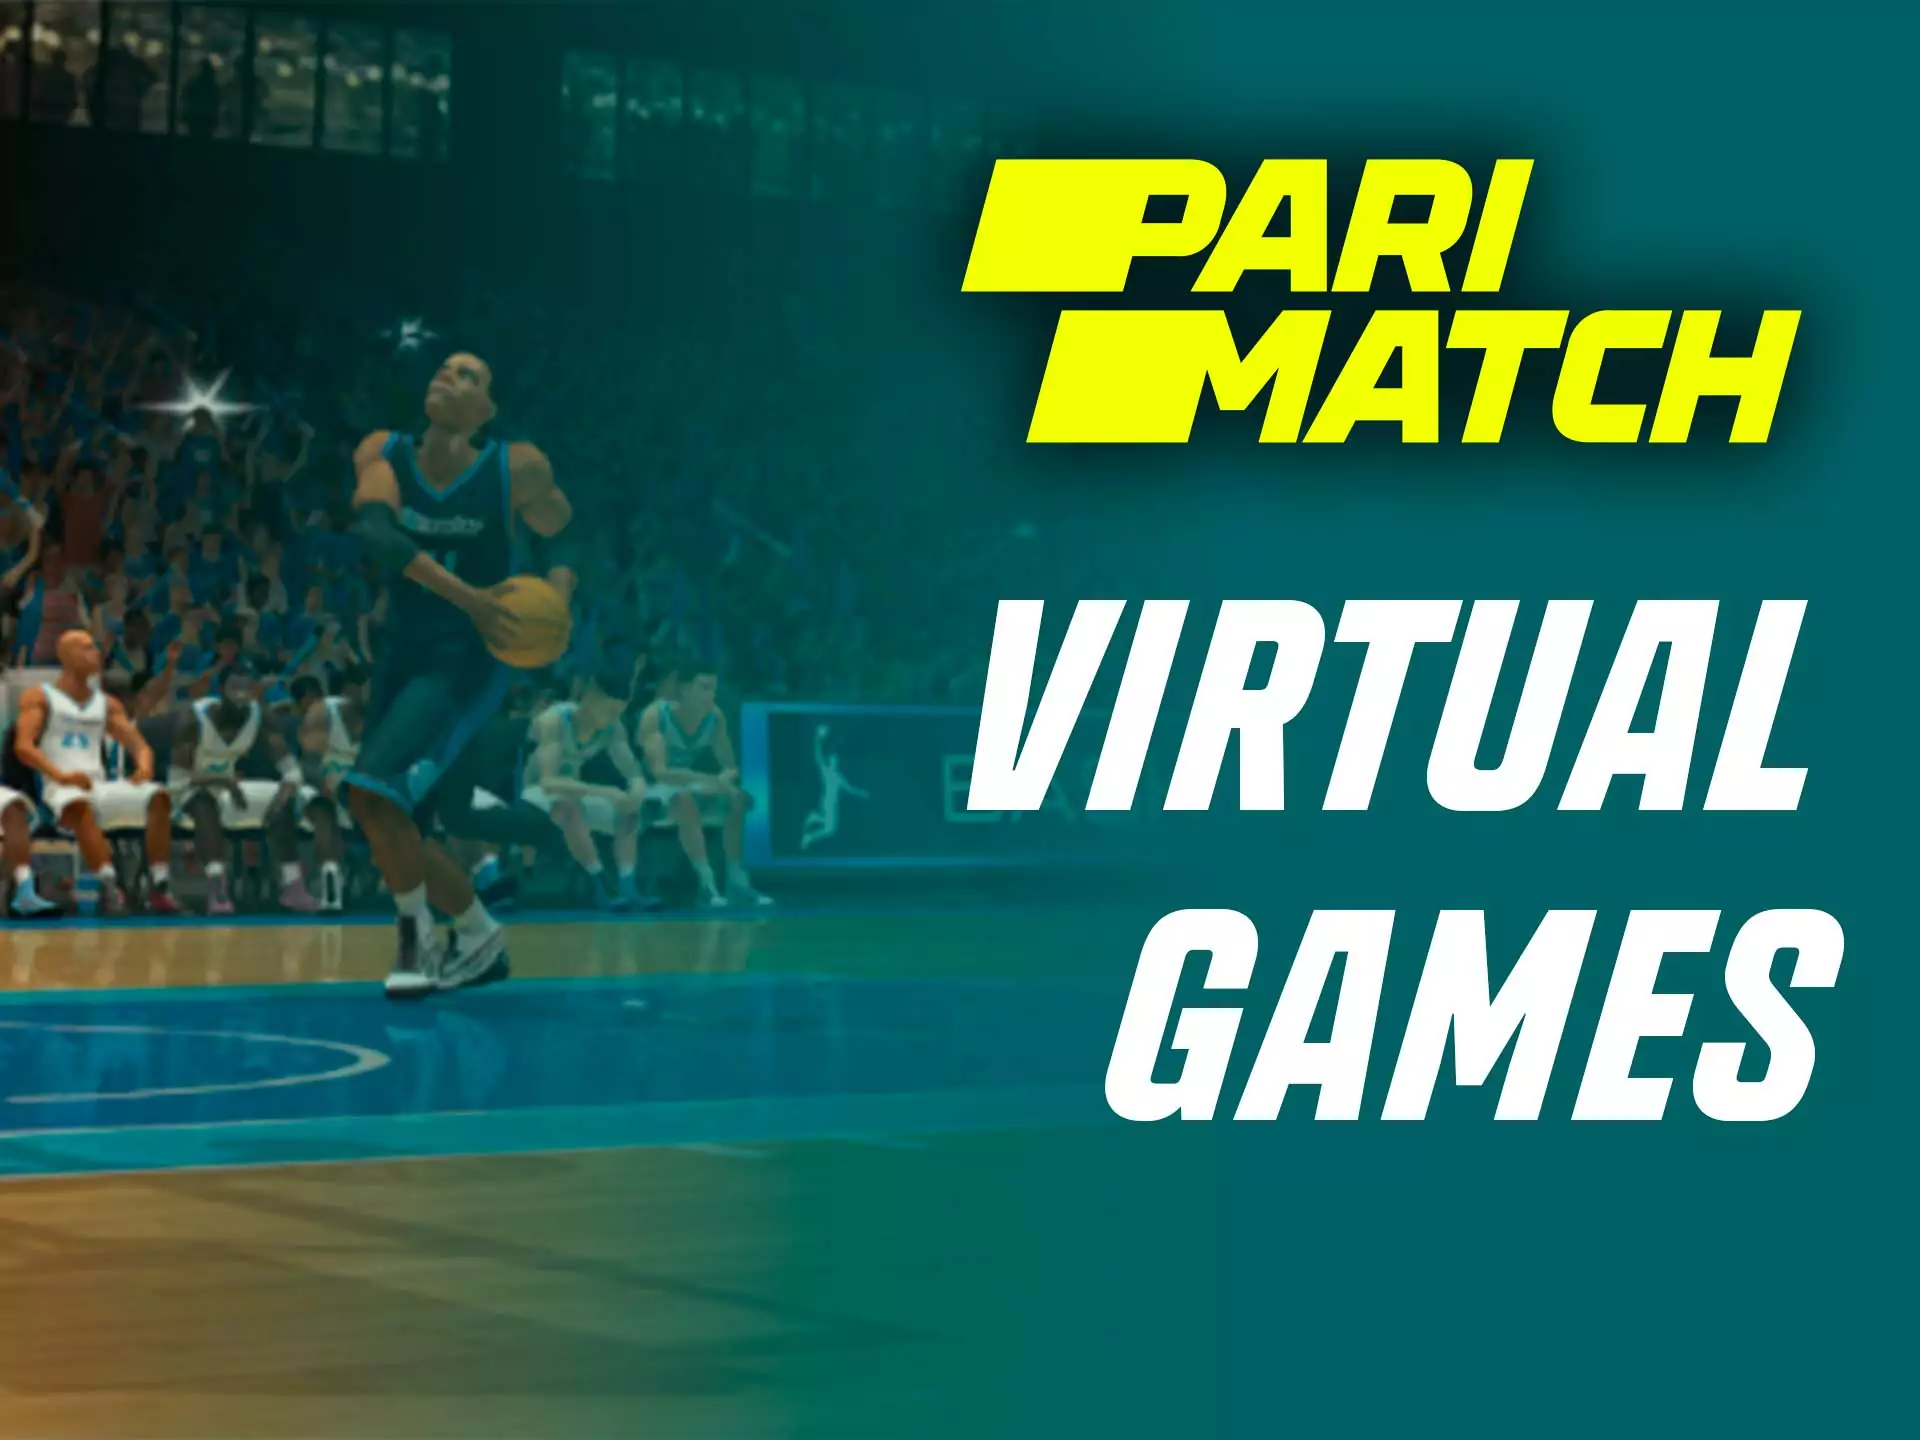 Bet on virtual basketball or hockey at the Parimatch sportsbook.